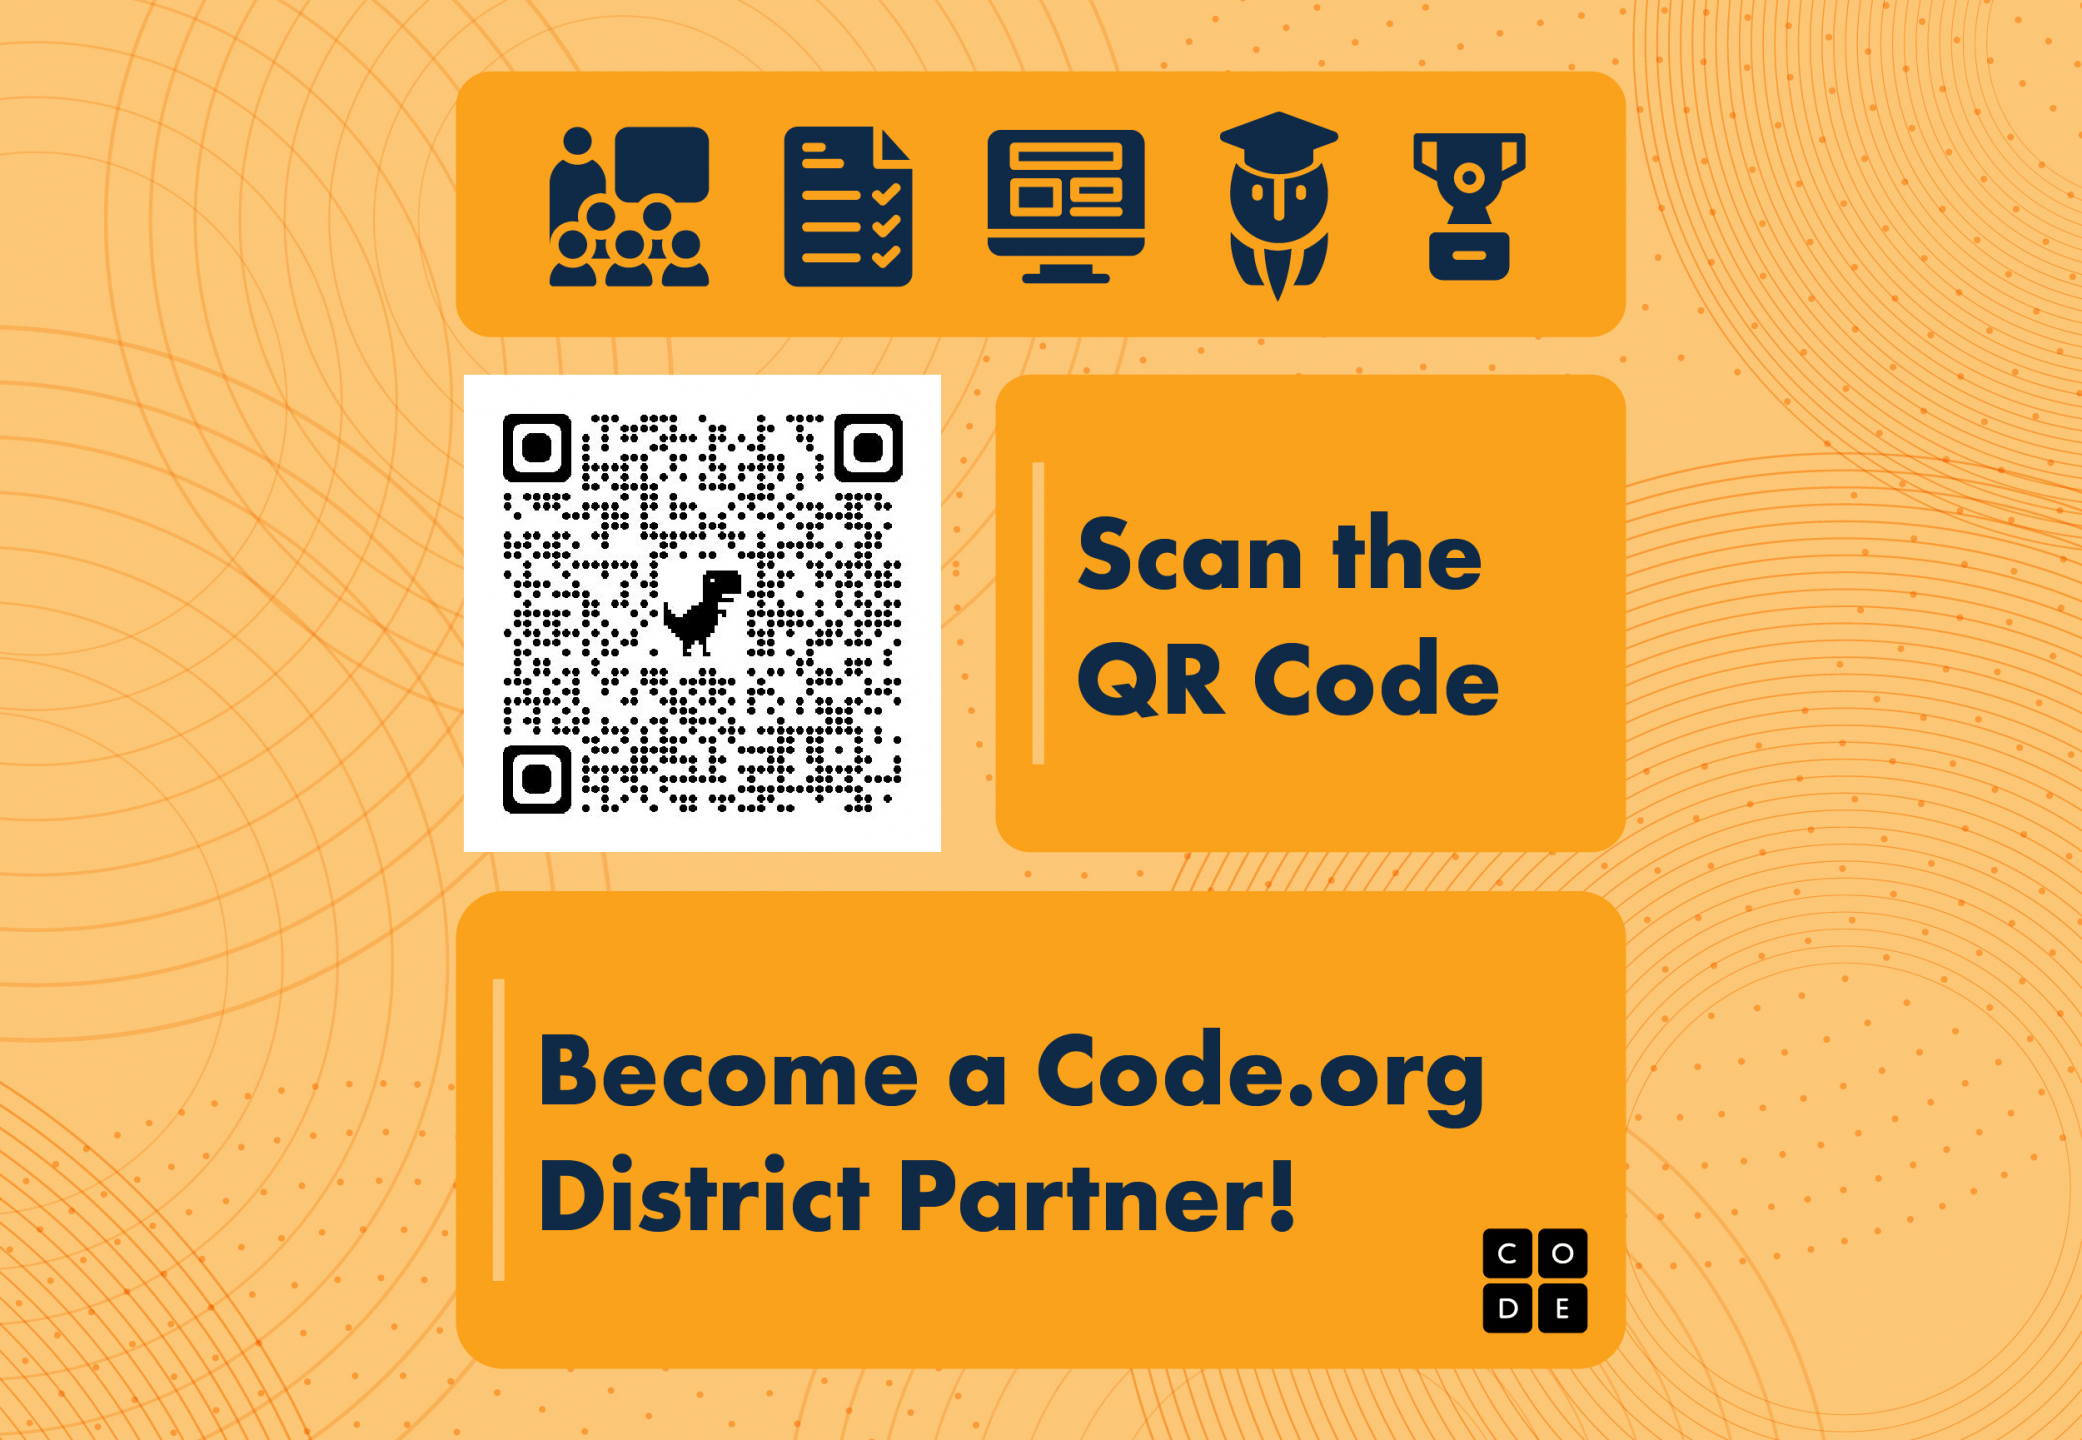 Scan the QR Code and Become a Code.org District Partner